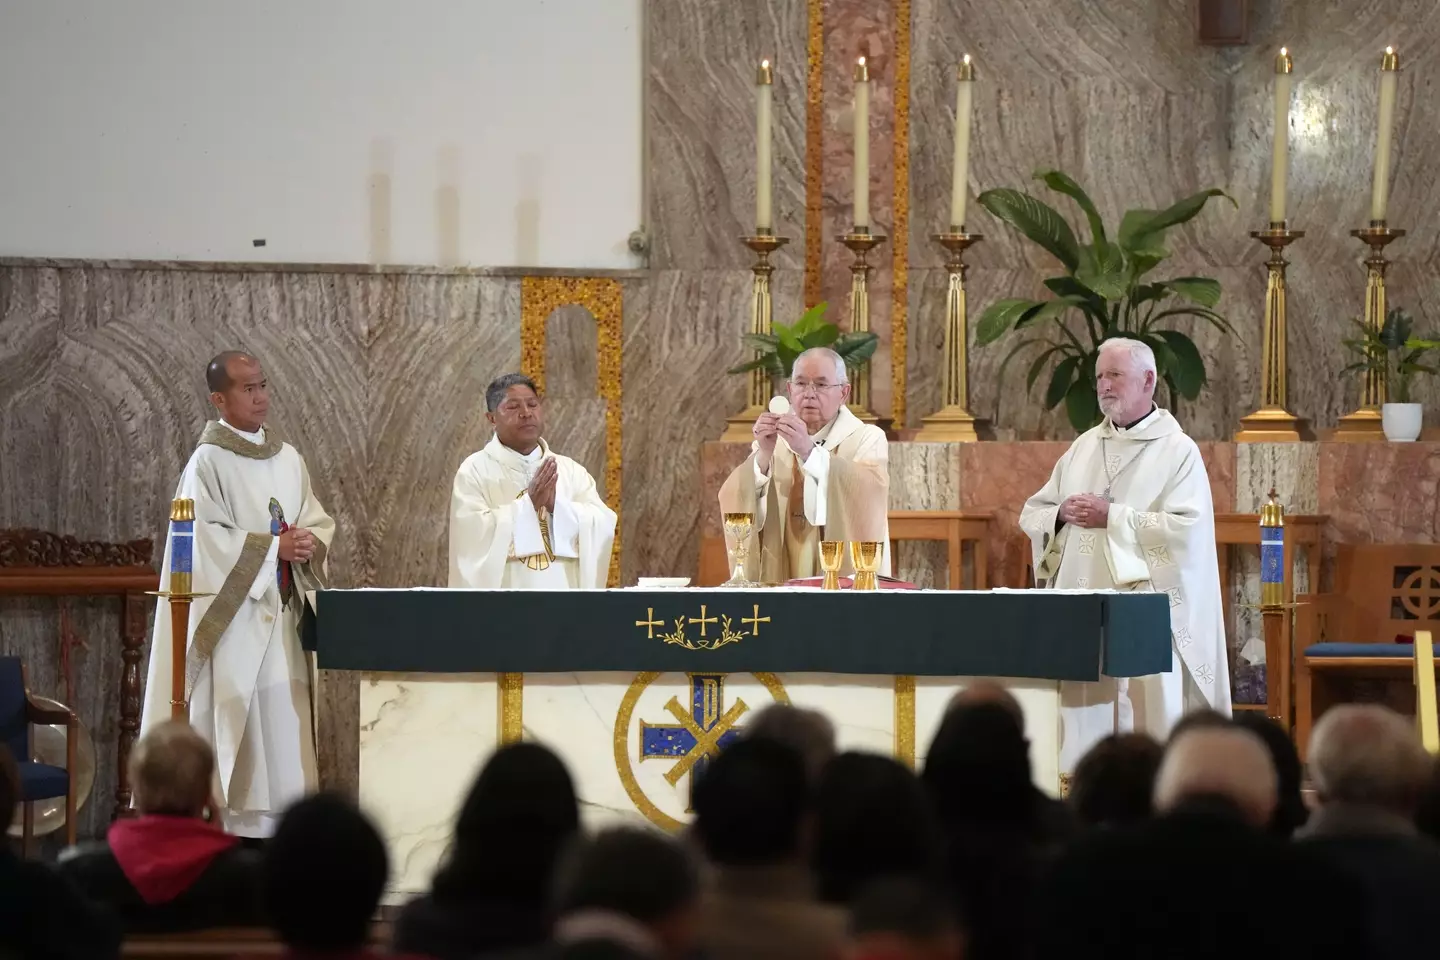 Bishop David O’Connell (on the end right) giving mass earlier this year.